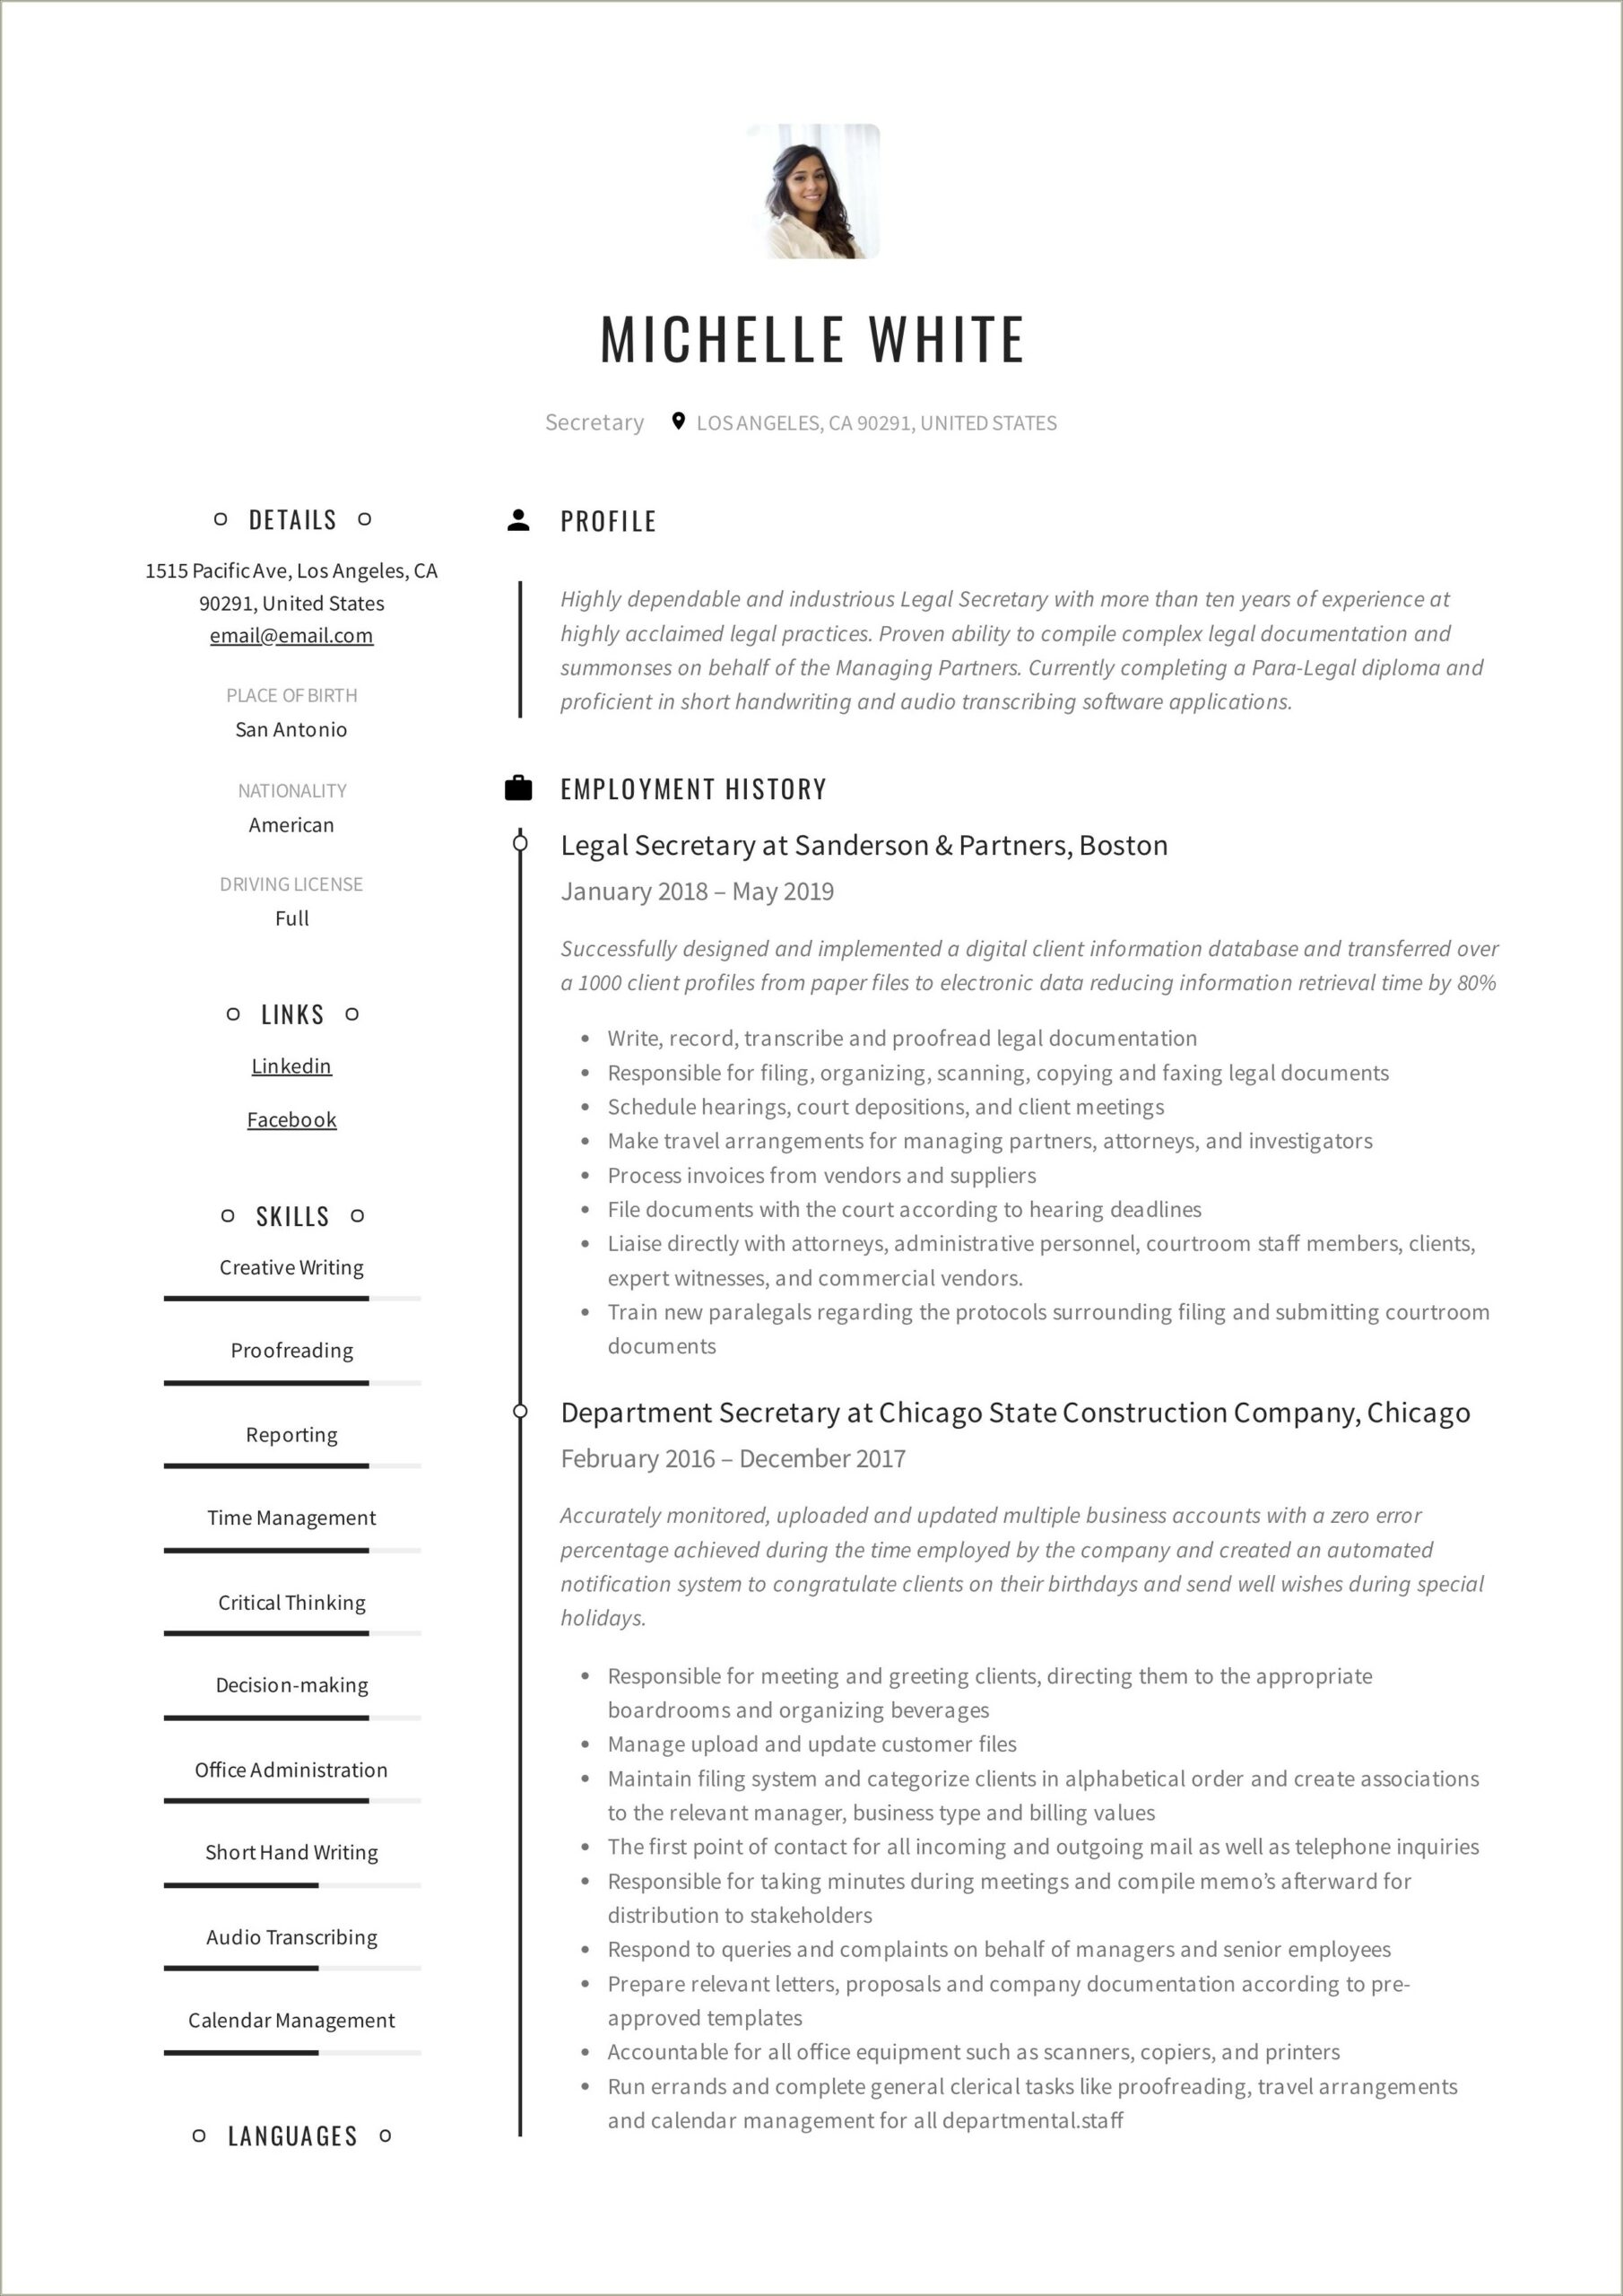 Resume Objective For Secretary At A School